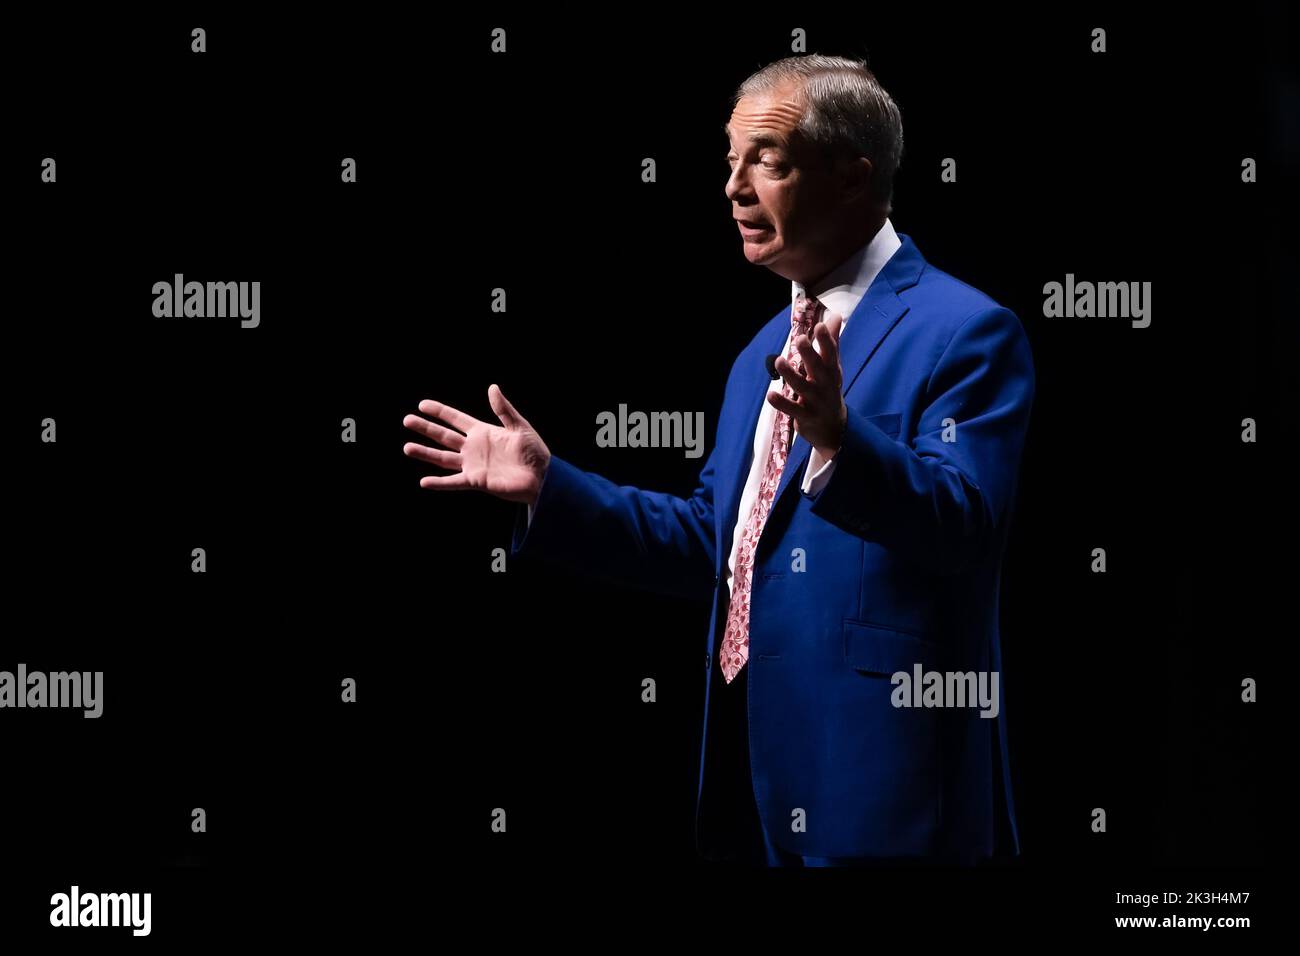 Melbourne, Australia, 26 September, 2022. Nigel Farage speaks to a sold out audience during An Evening With Nigel Farage at The Melbourne Convention and Exhibition Centre on September 26, 2022 in Melbourne, Australia. Credit: Dave Hewison/Speed Media/Alamy Live News Stock Photo